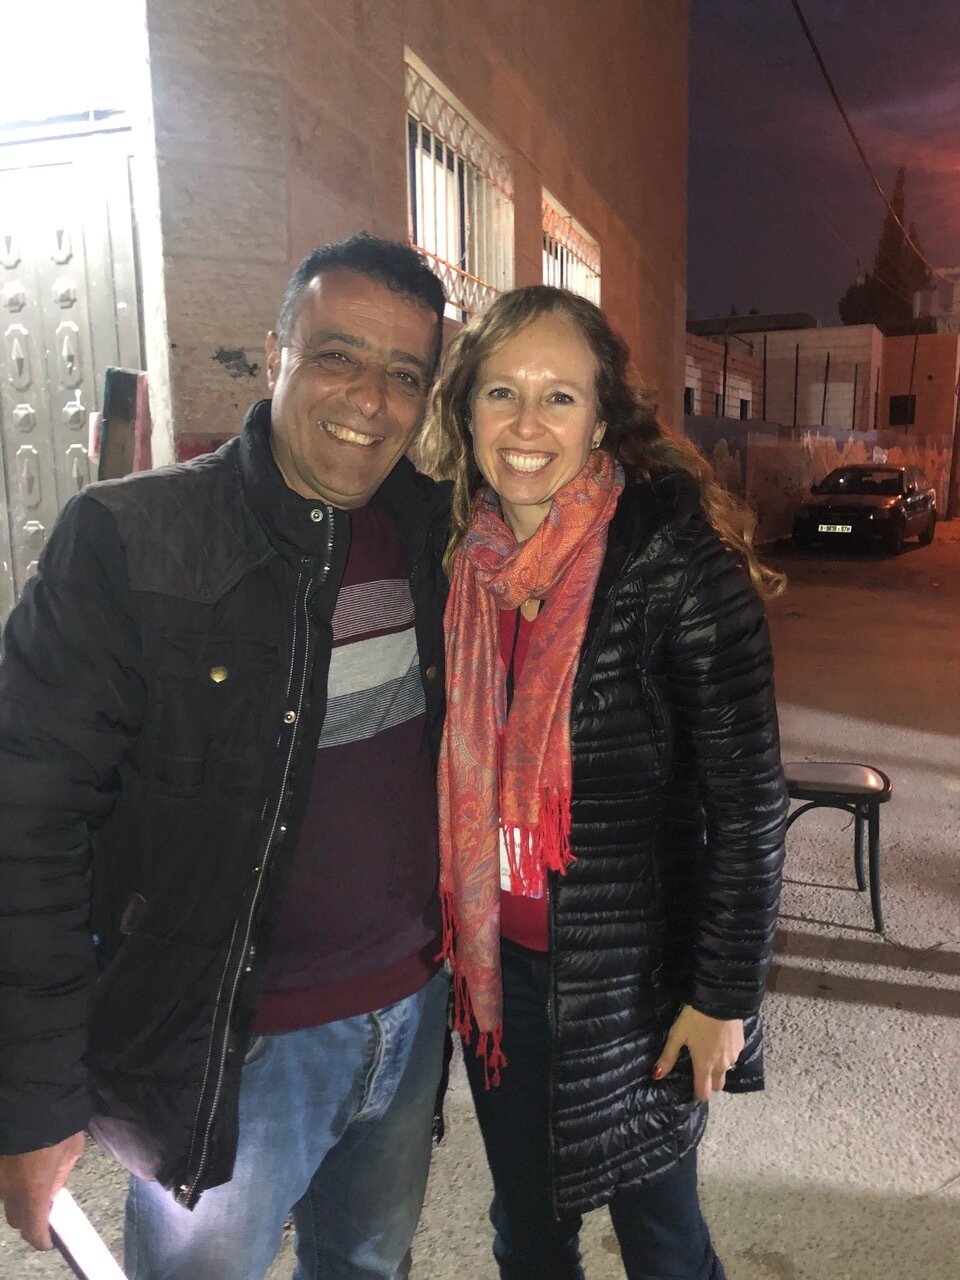   Marwan,  a Palestinian Muslim, father of five, was born a refugee in the Deheishe camp in Bethlehem, and gave our group a tour of a neighboring refugee camp. During the decade that I’ve known him, I’ve admired Marwan’s passionate plea for the equal